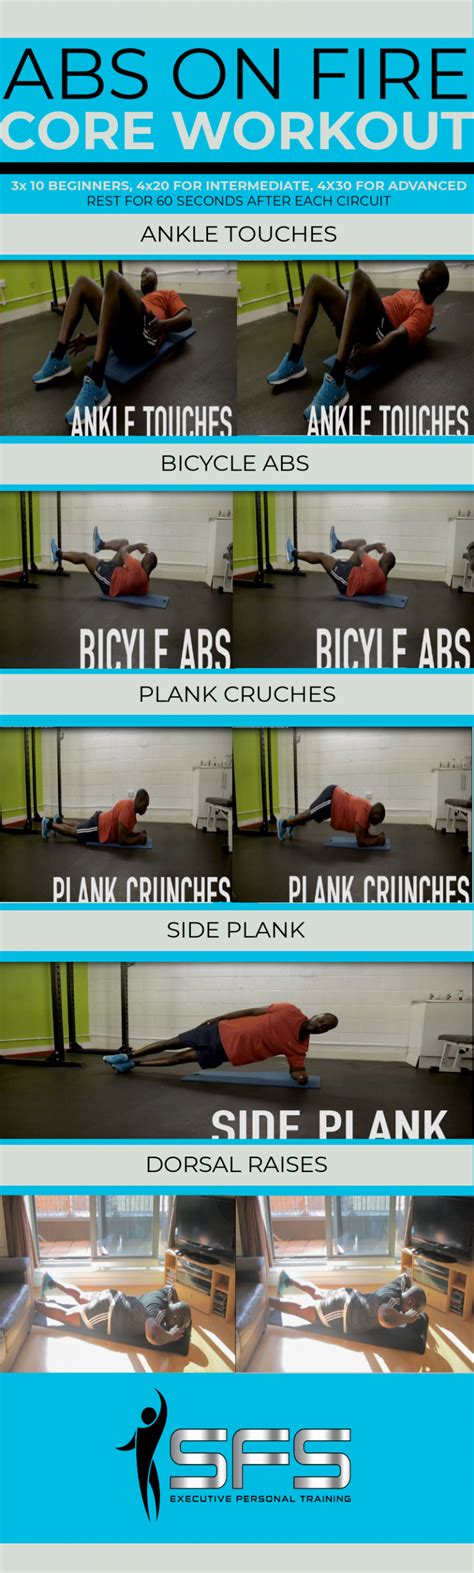 Crazy Ab Workout 12 Abdominal Workouts To Get In Shape Abs Workout